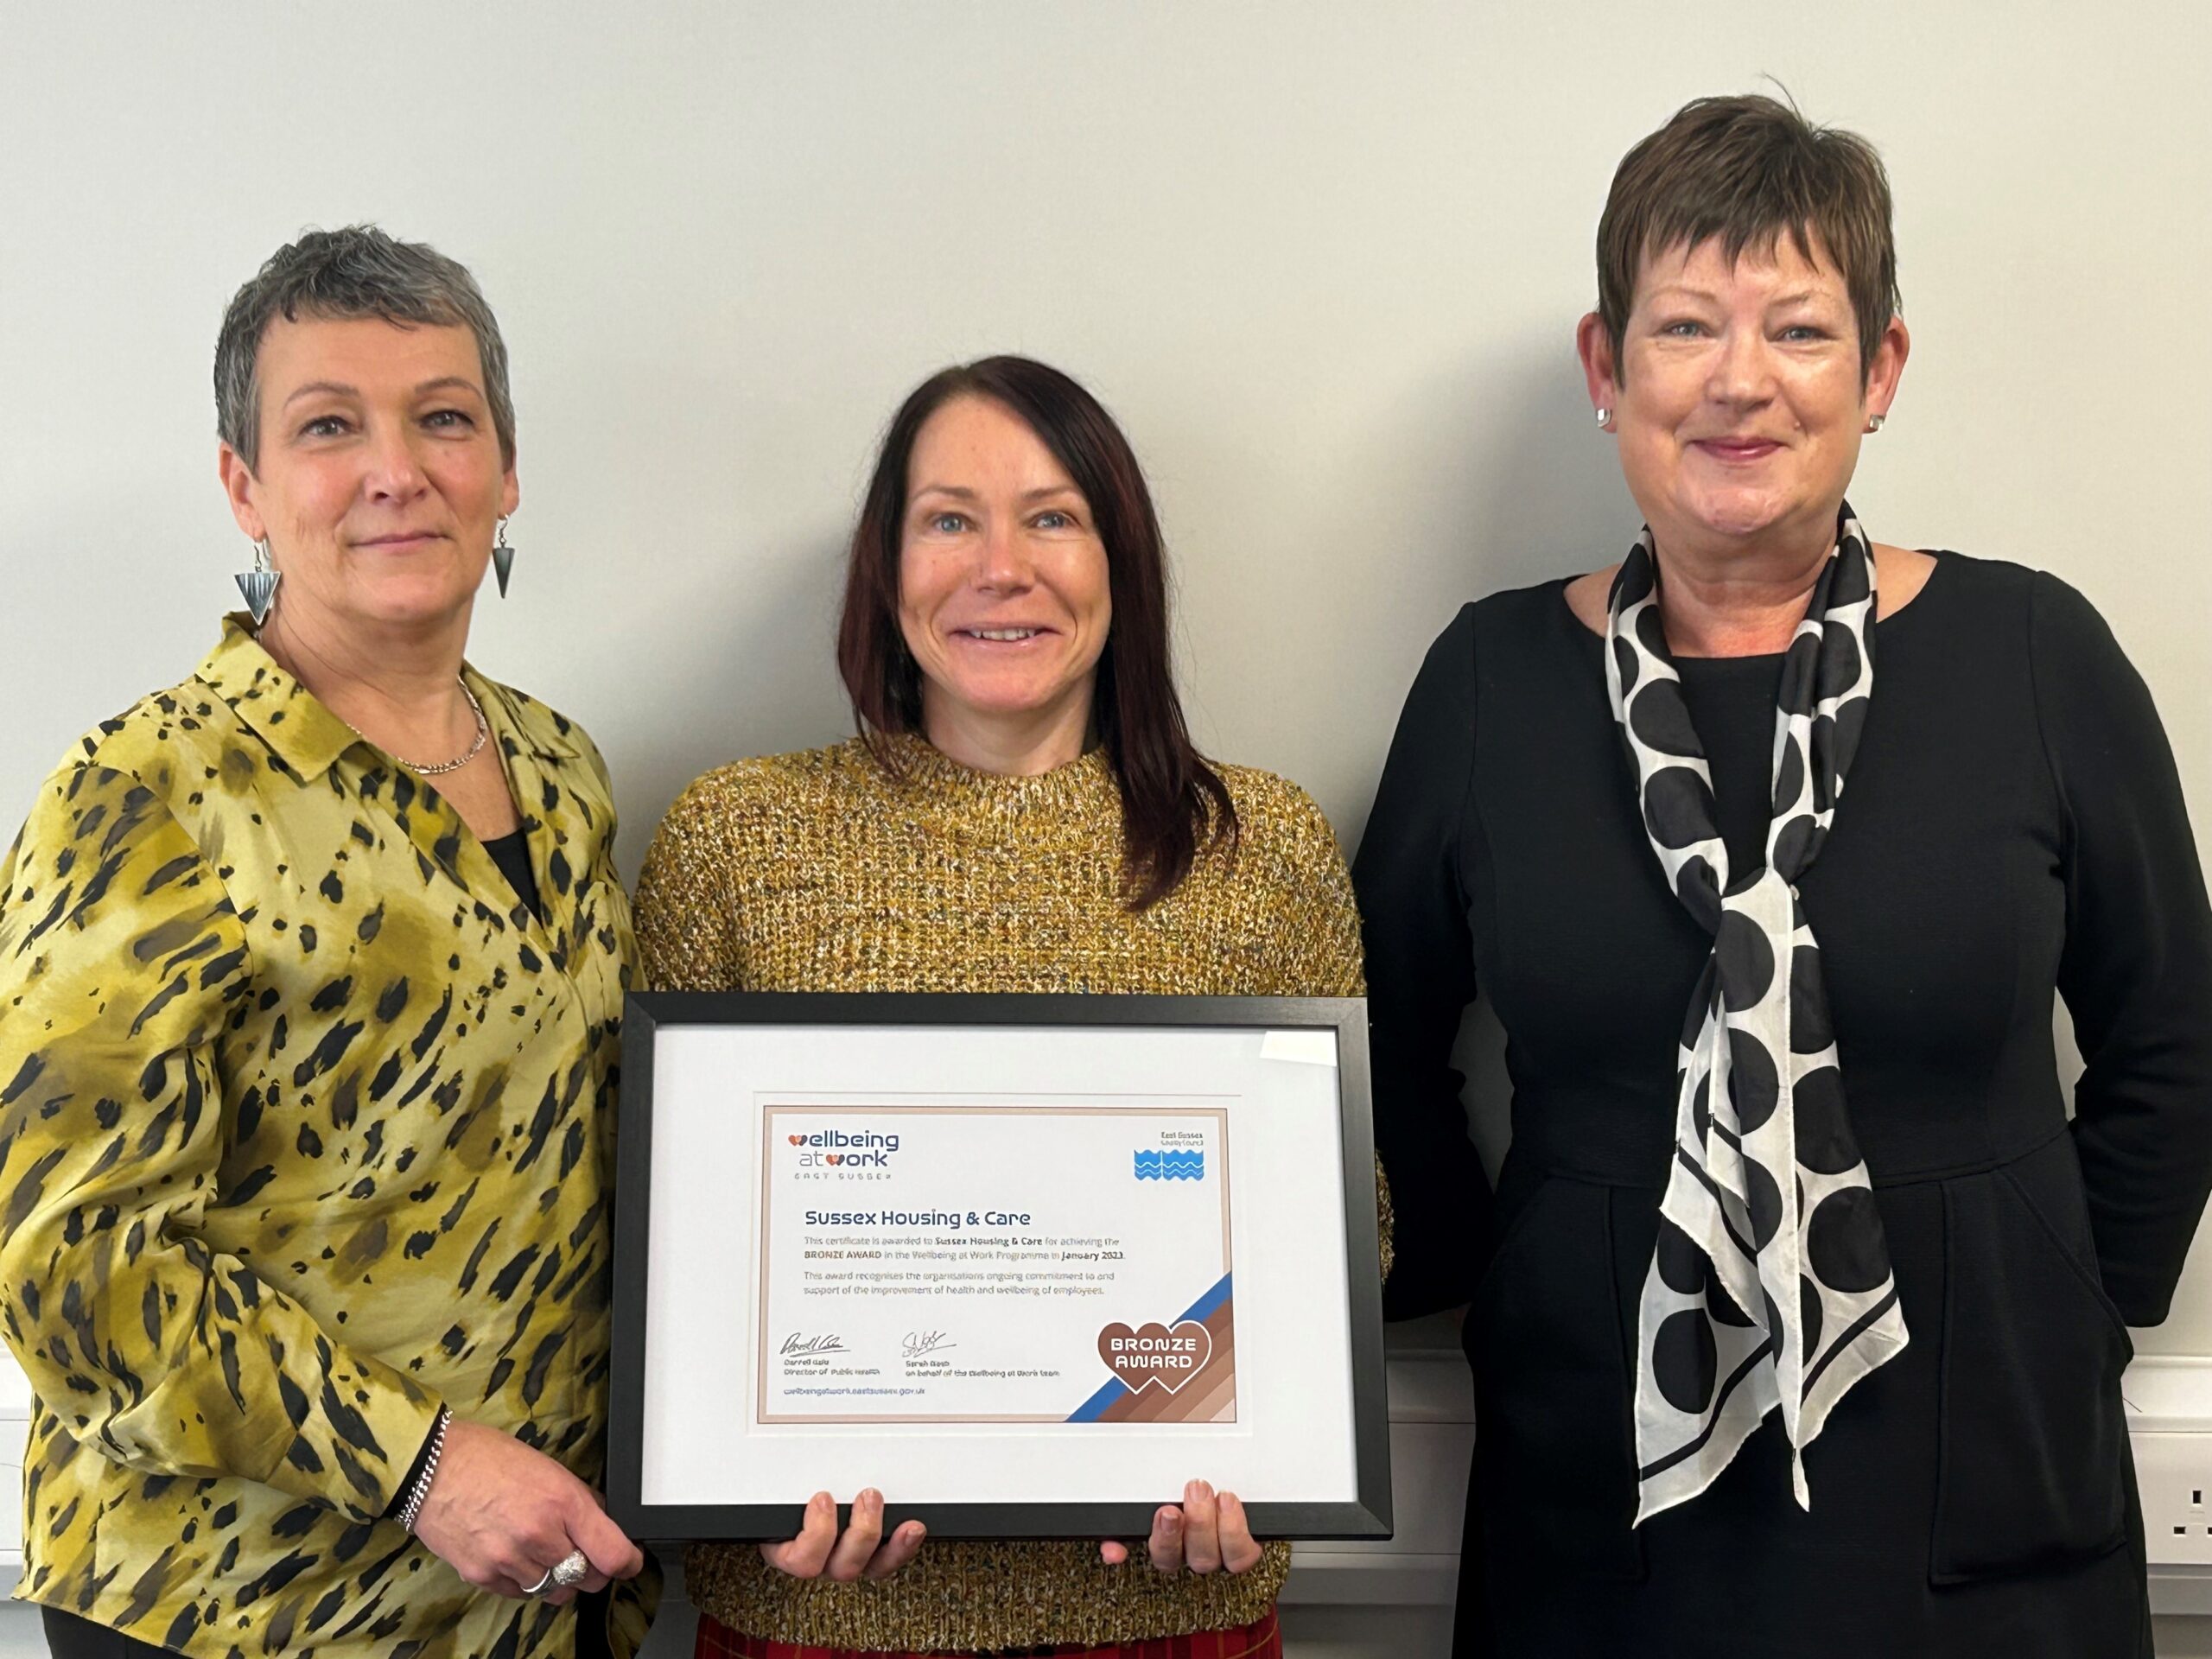 Left to Right: Sussex Housing’s Wellbeing Leads and HR Manager Debbe Wordley and Training Coordinator Gabby Dolan, and the CEO Tracey Evans.